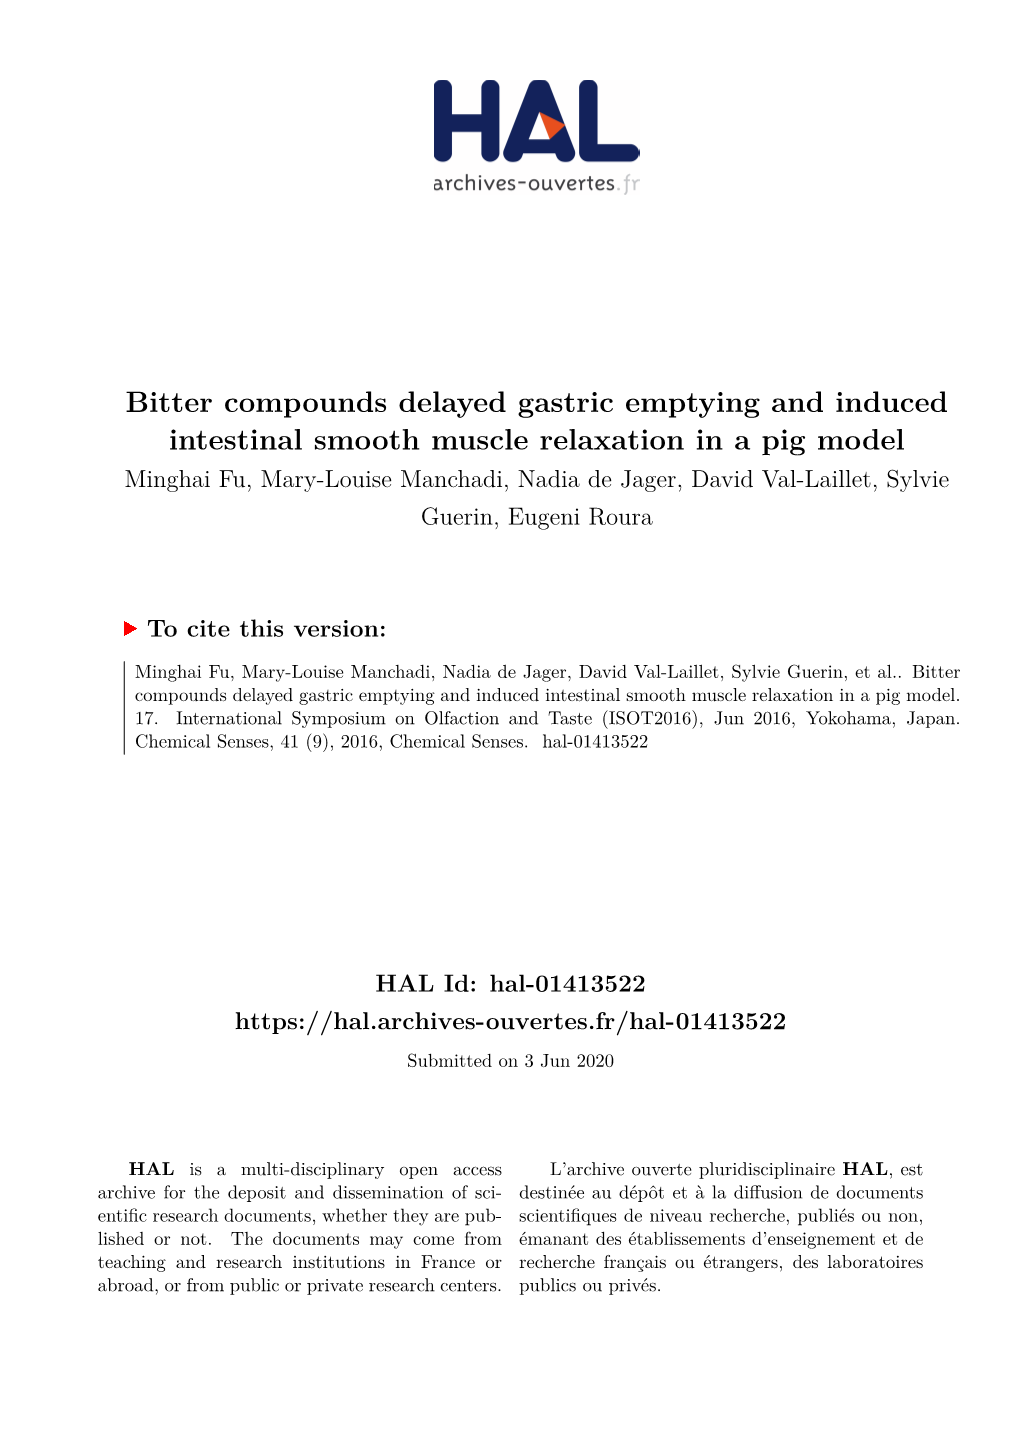 Bitter Compounds Delayed Gastric Emptying and Induced Intestinal